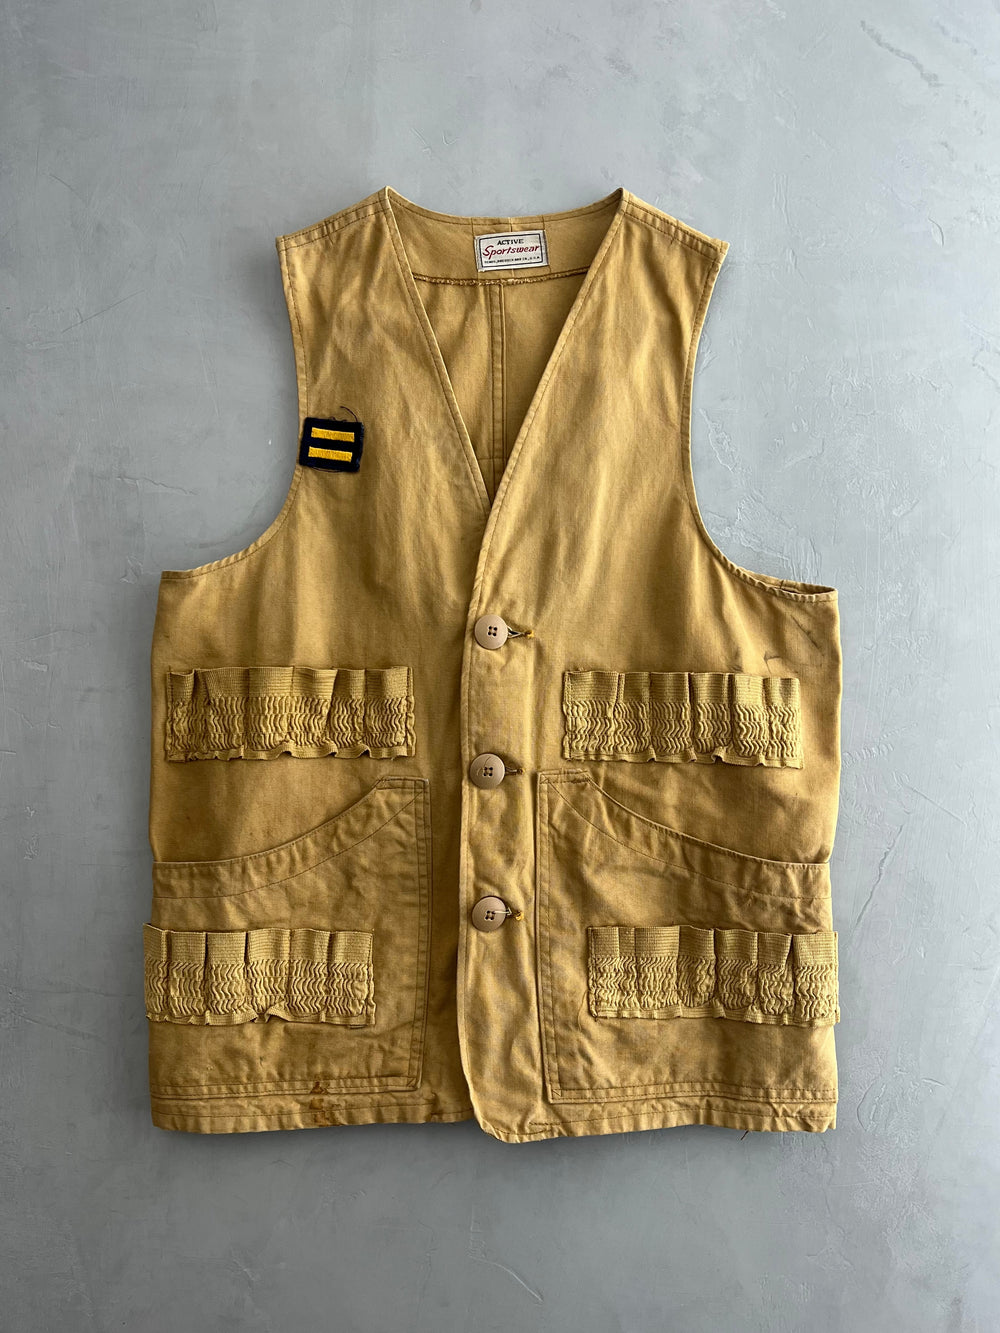 Sears Duck Cloth Hunting Vest [M]